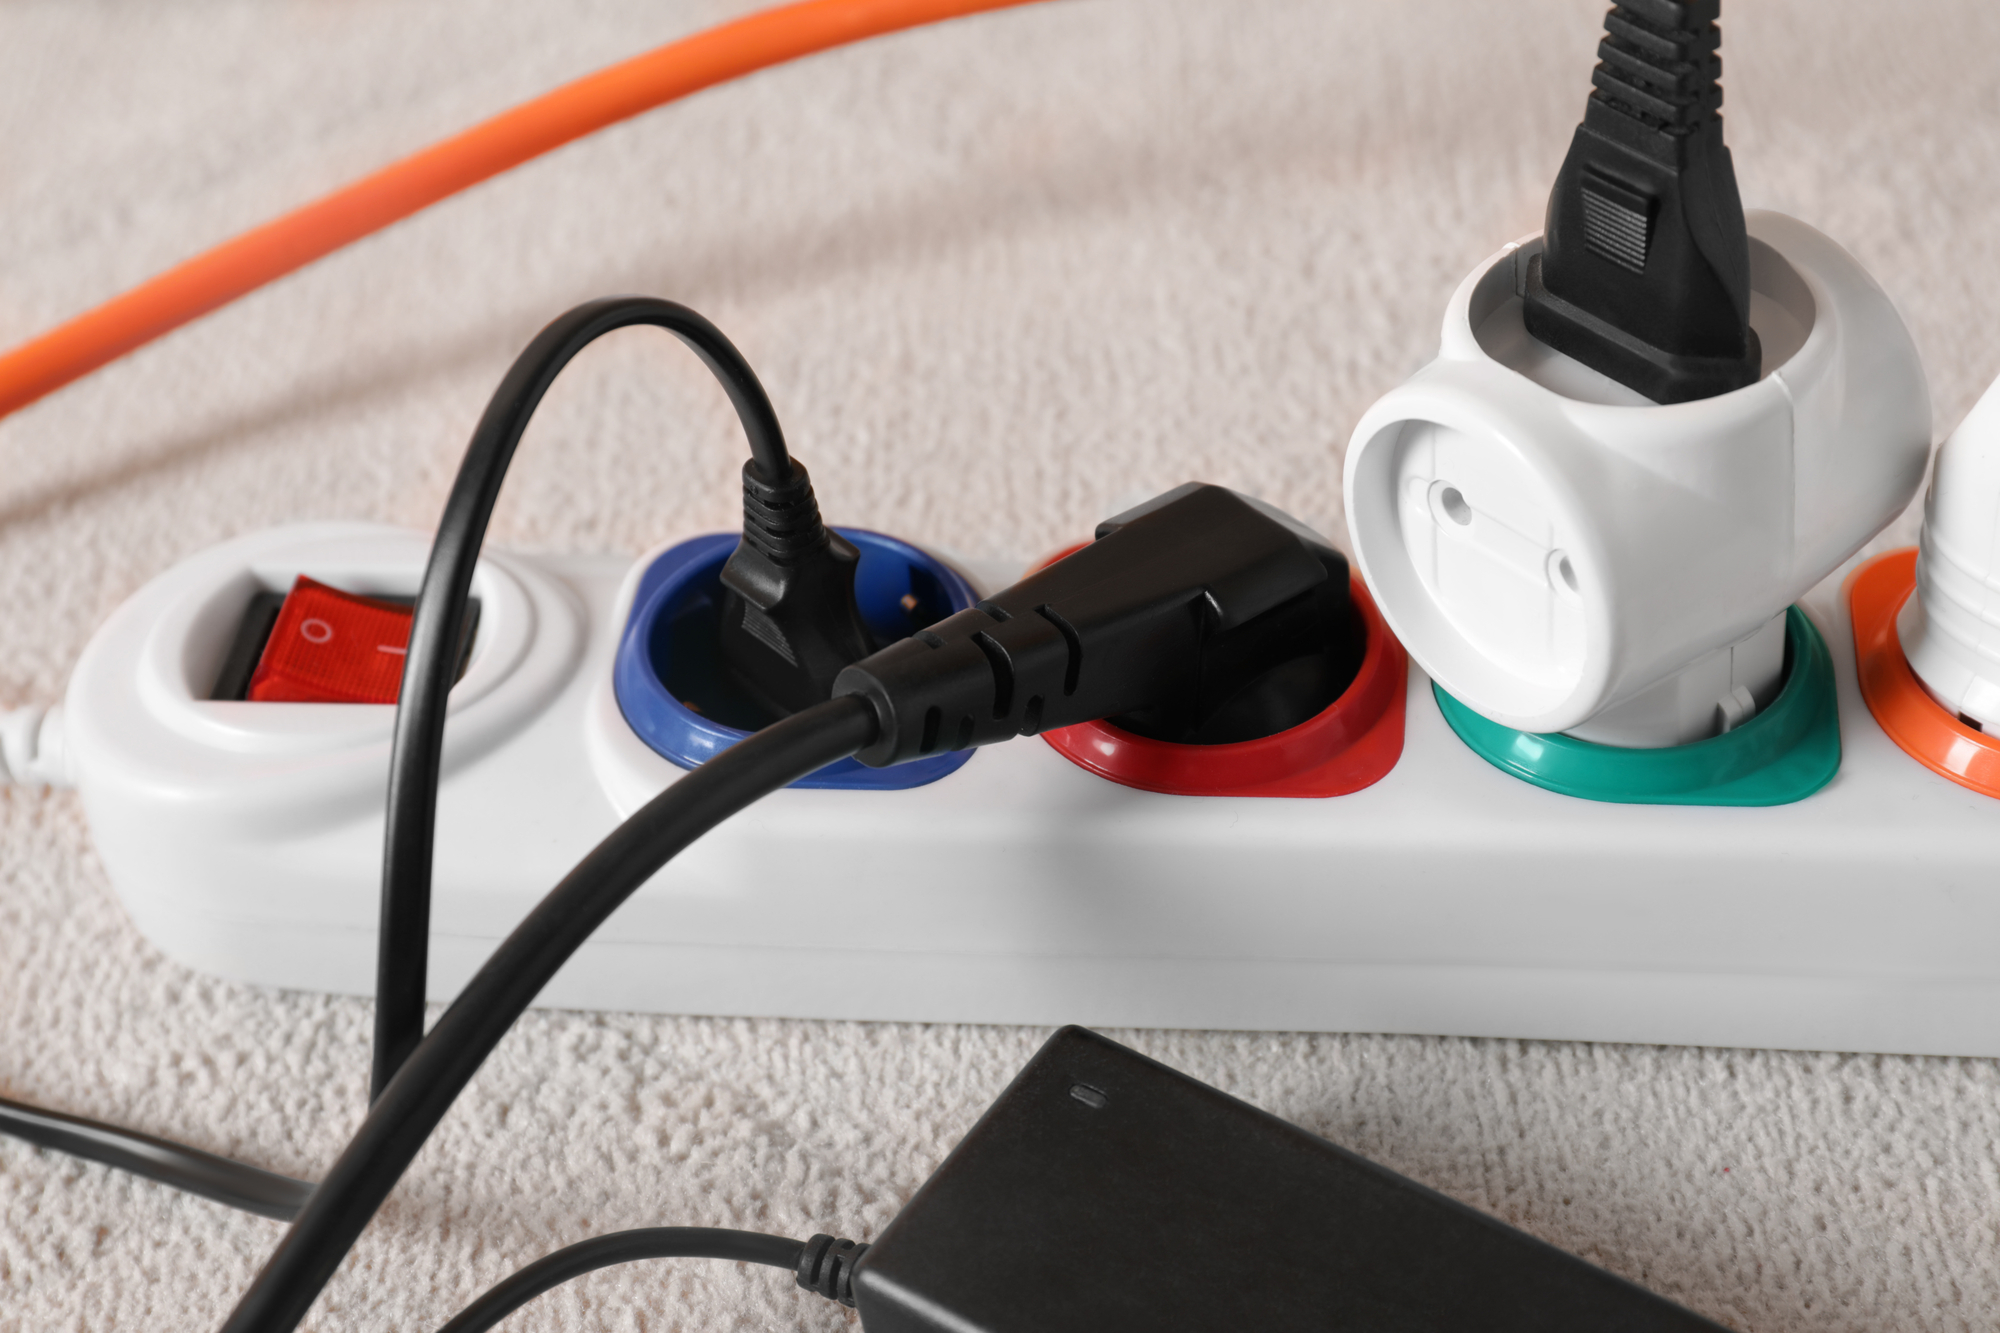 a power strip supporting too many devices